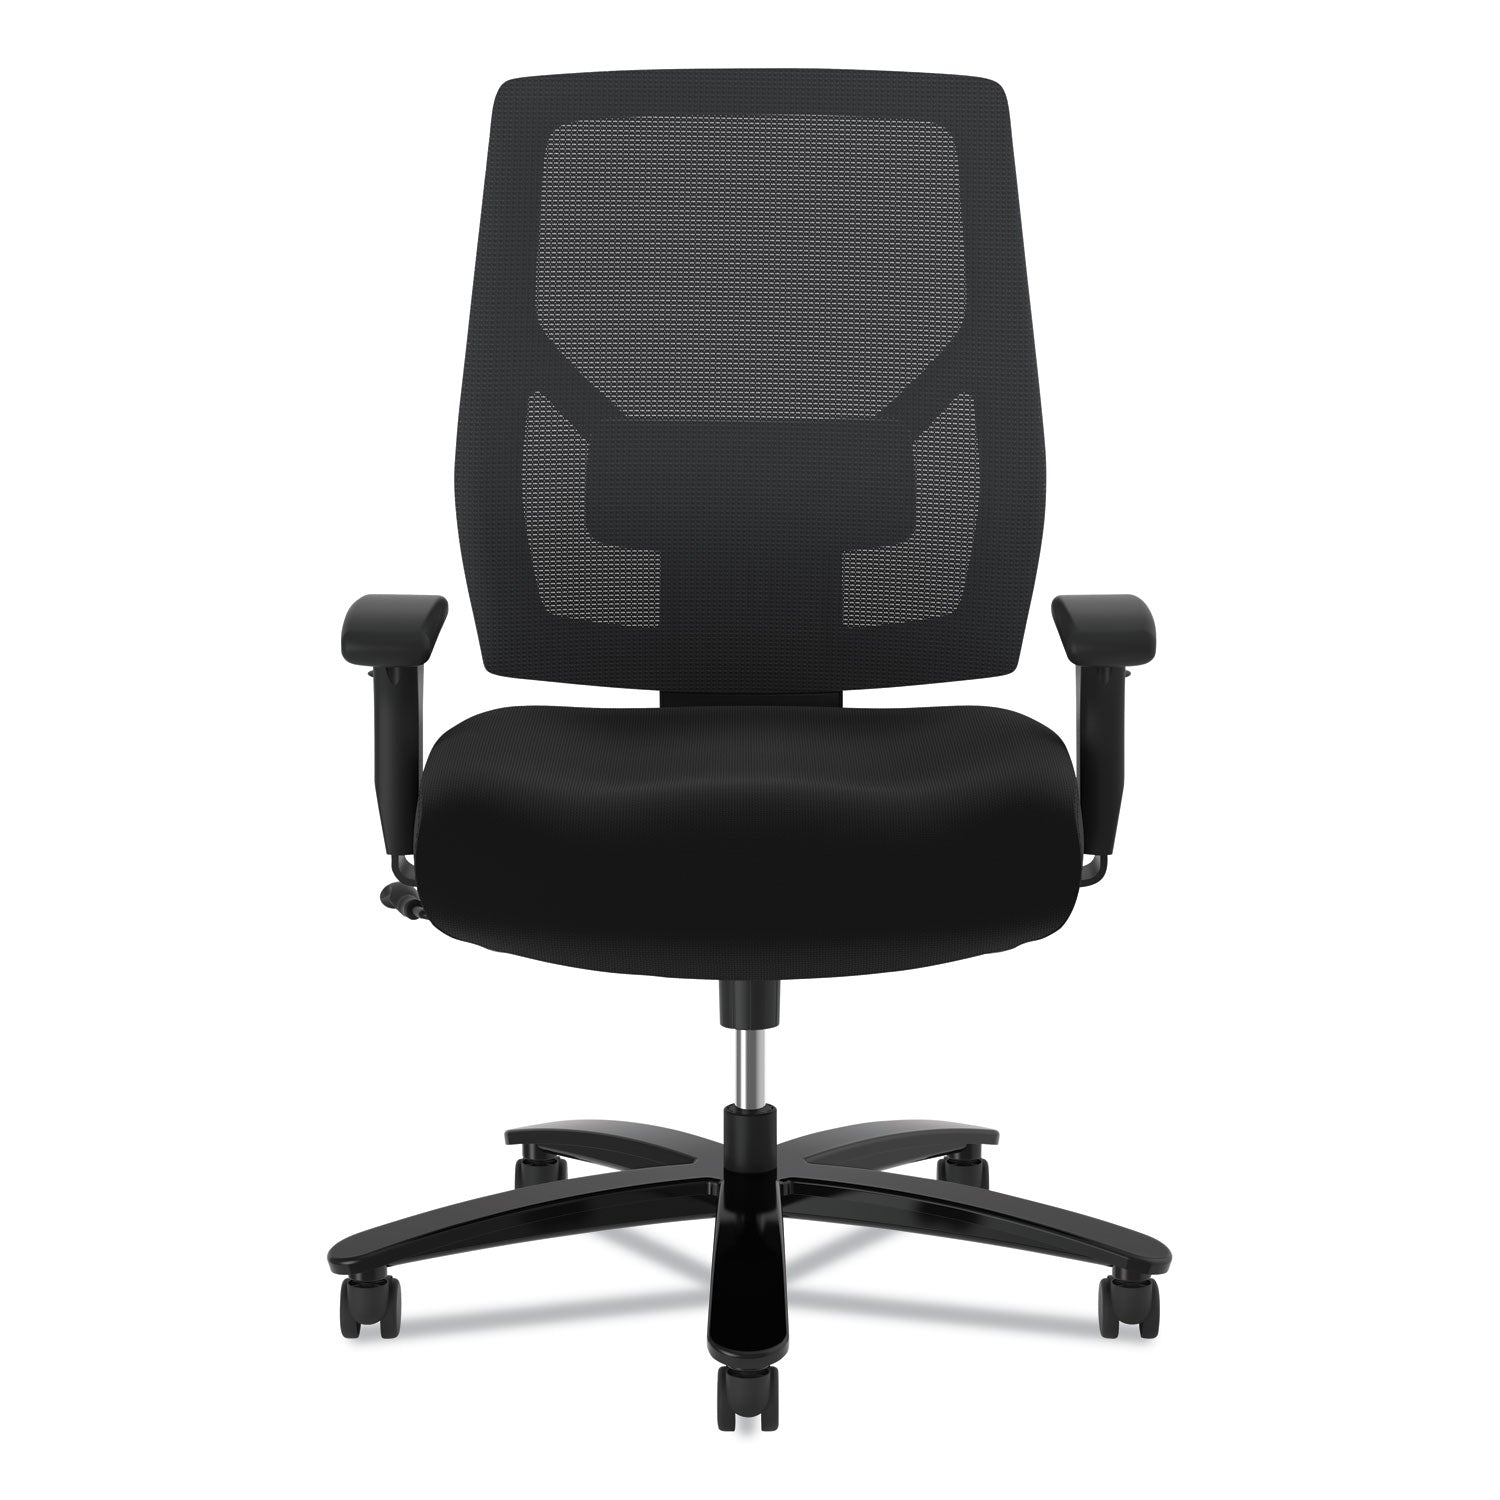 crio-big-and-tall-mid-back-task-chair-supports-up-to-450-lb-18-to-22-seat-height-black_bsxvl585es10t - 2